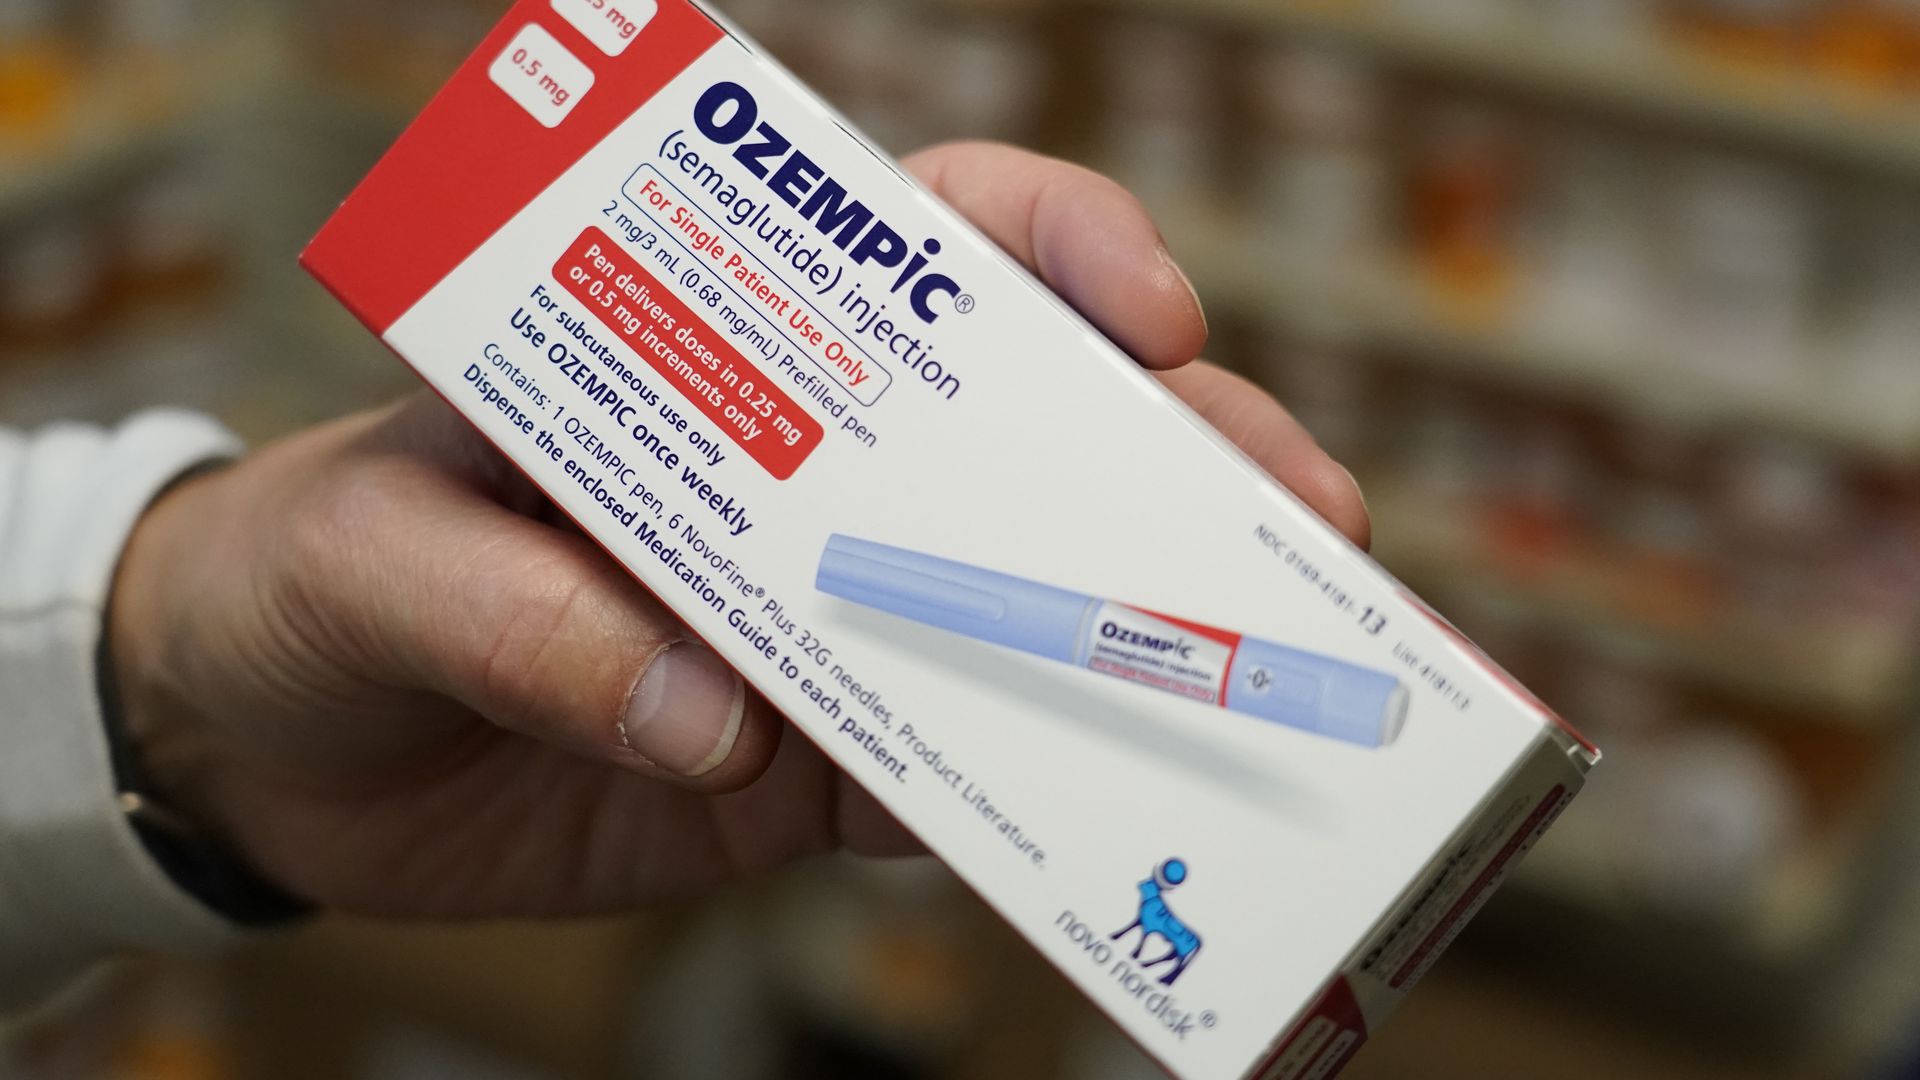 A close-up photo of pharmacist's hand holding an Ozempic box